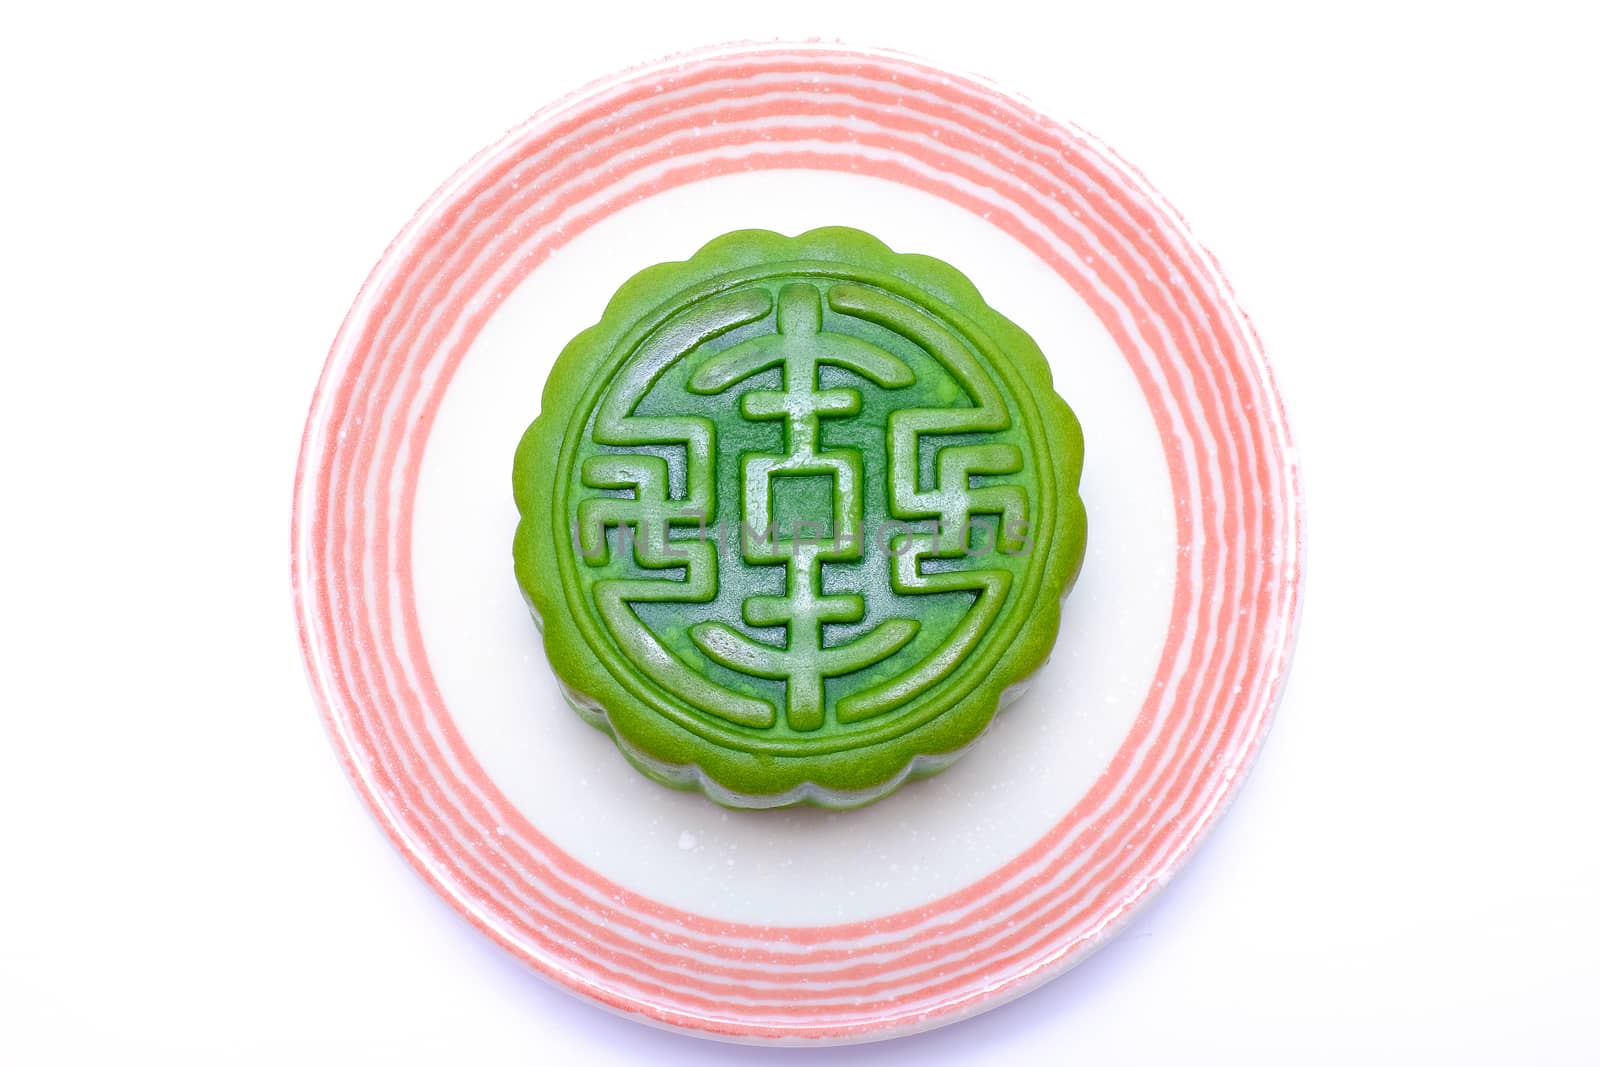 chinese traditional pastry on a white ceramic plate, with non-traditional green tea flavor